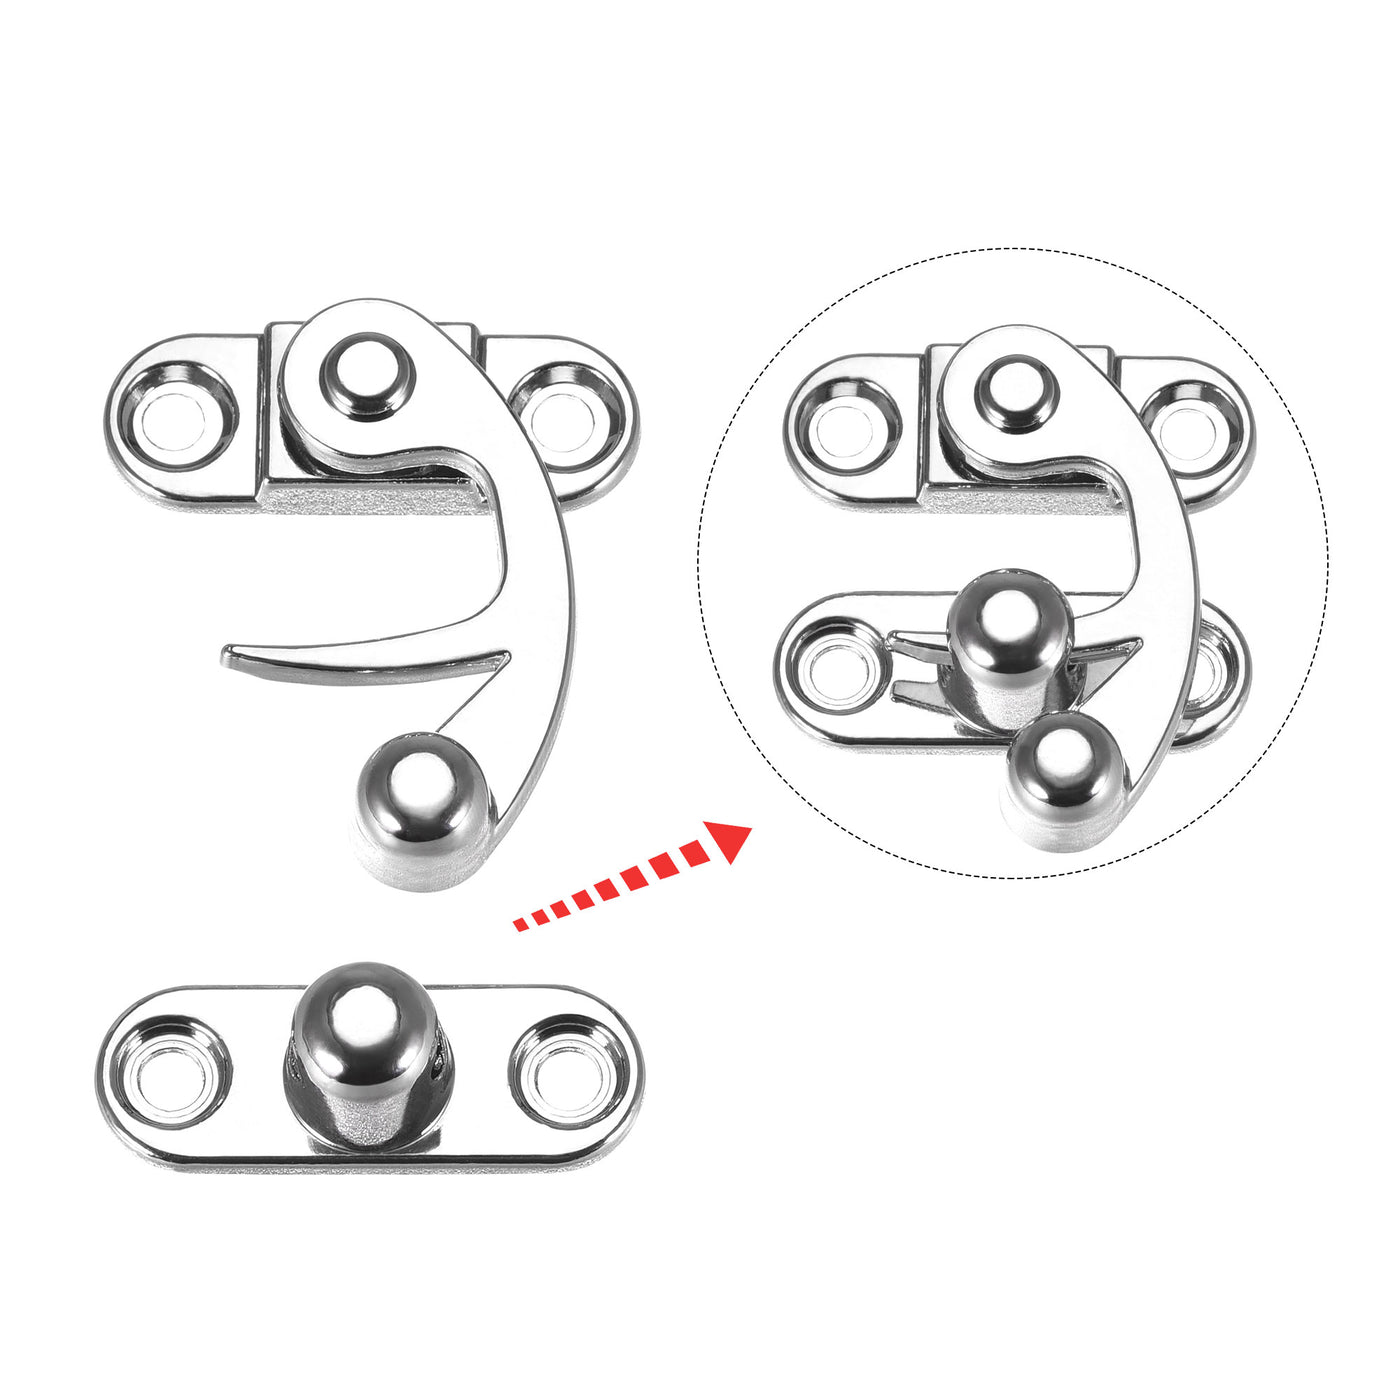 uxcell Uxcell Antique Vintage Lock Clasp Right Latch Hook Hasp 33mmx28mm Swing Arm Latch Silver Tone 2 Pcs